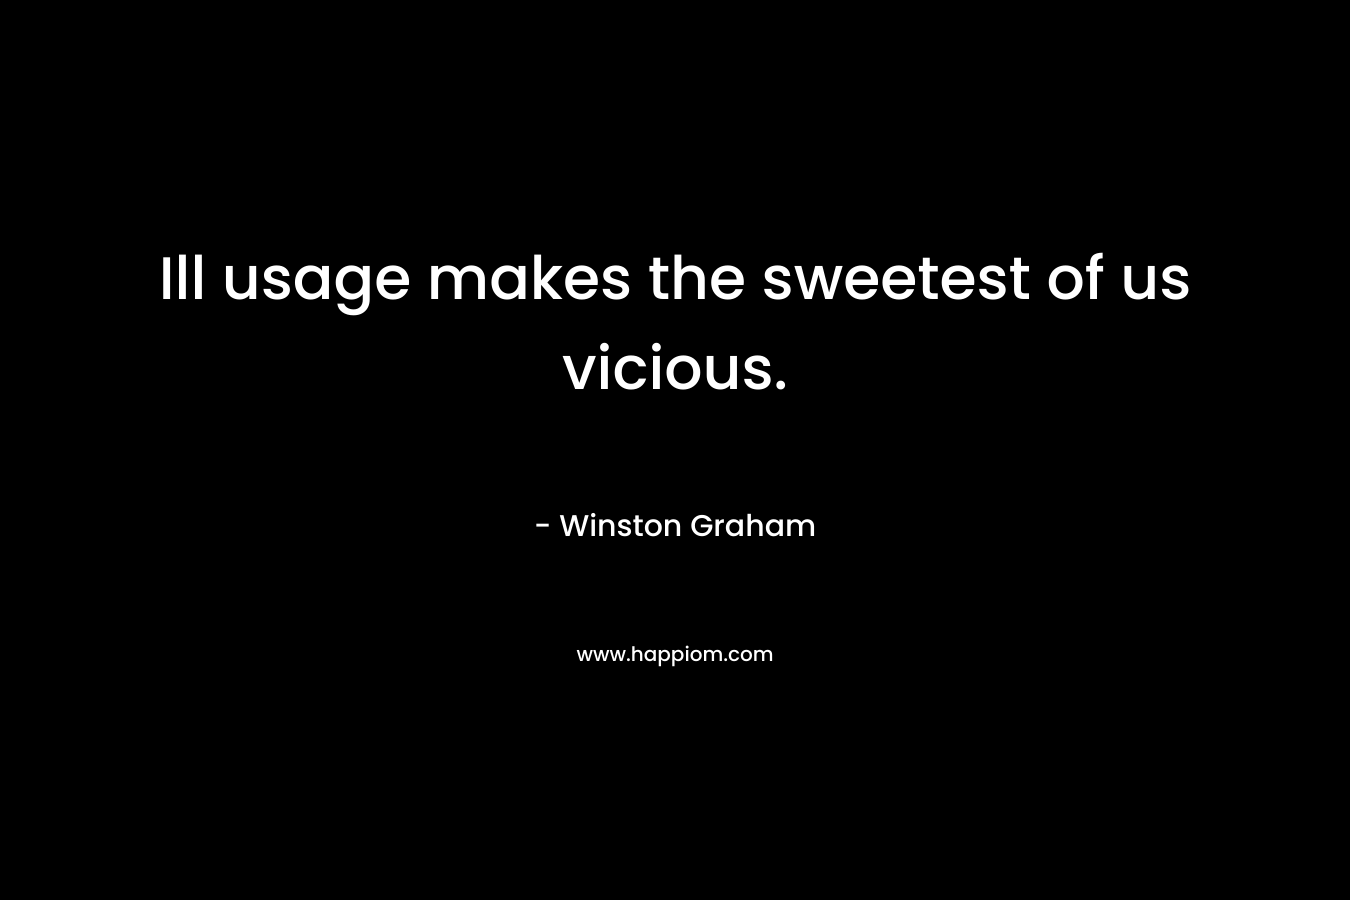 Ill usage makes the sweetest of us vicious. – Winston Graham